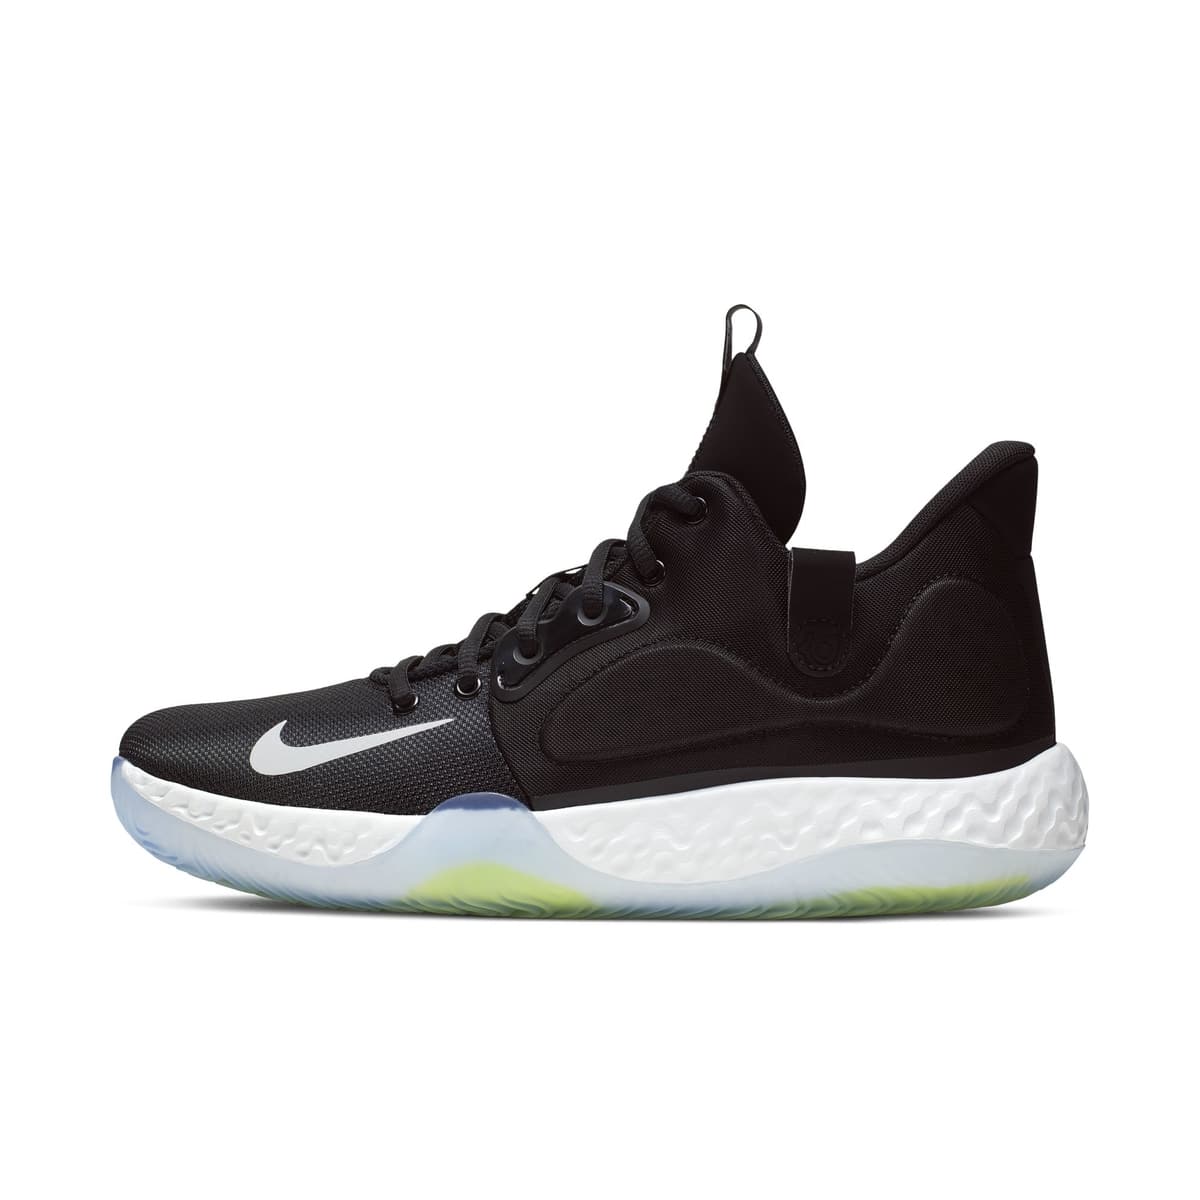 The Nike KD Trey V 7 Replaces Zoom Air 